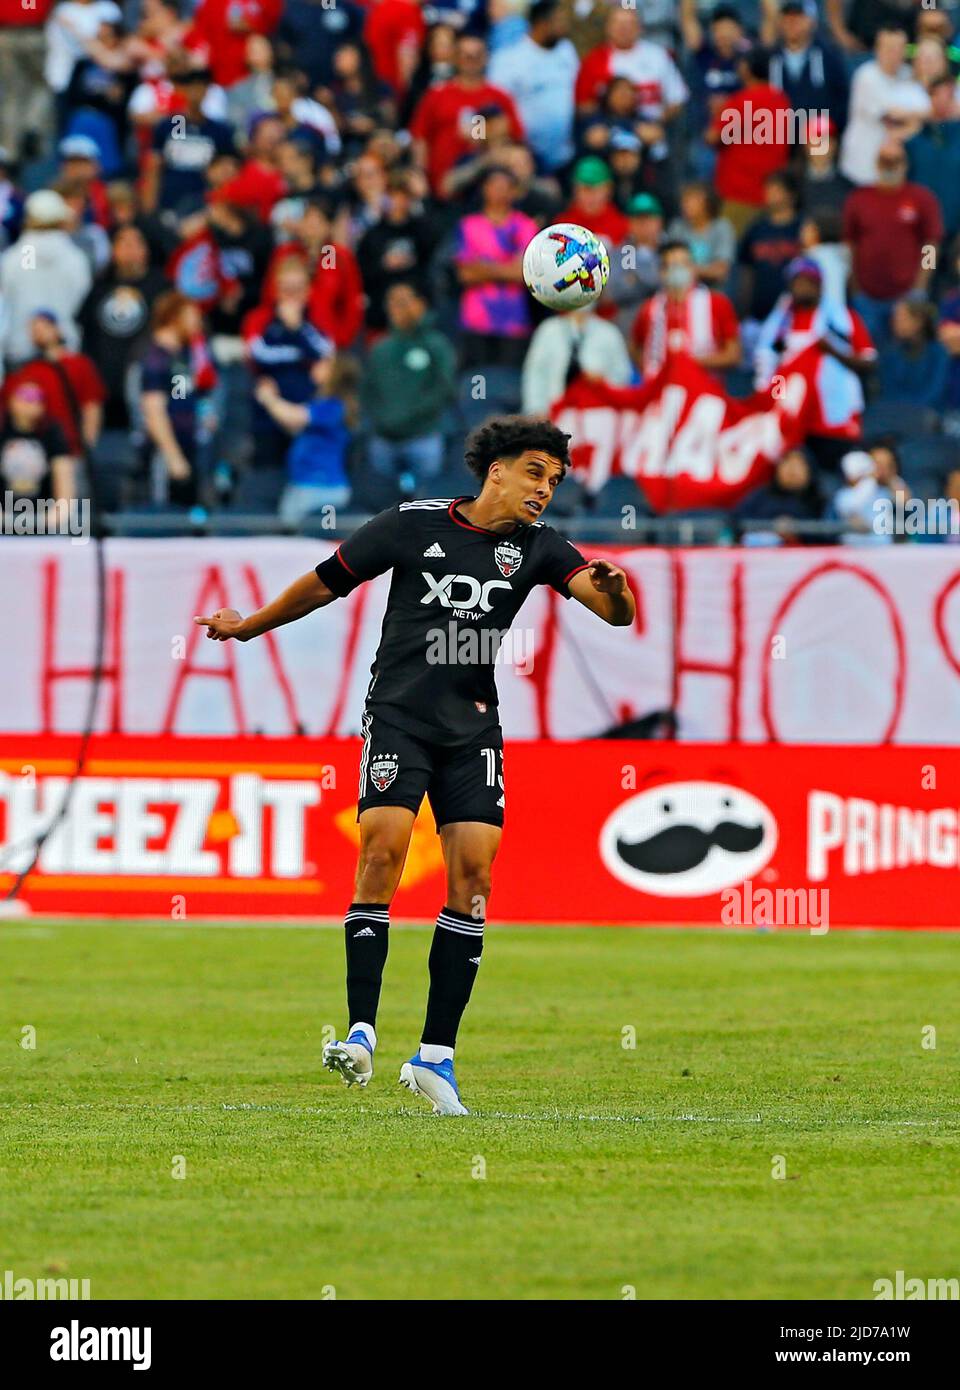 Chicago, USA, 18 June 2022.  MLS DC United's Sofiane Djeffal heads the ball during a match against the Chicago Fire FC at Soldier Field in Chicago, IL, USA. Credit: Tony Gadomski / All Sport Imaging / Alamy Live News Stock Photo